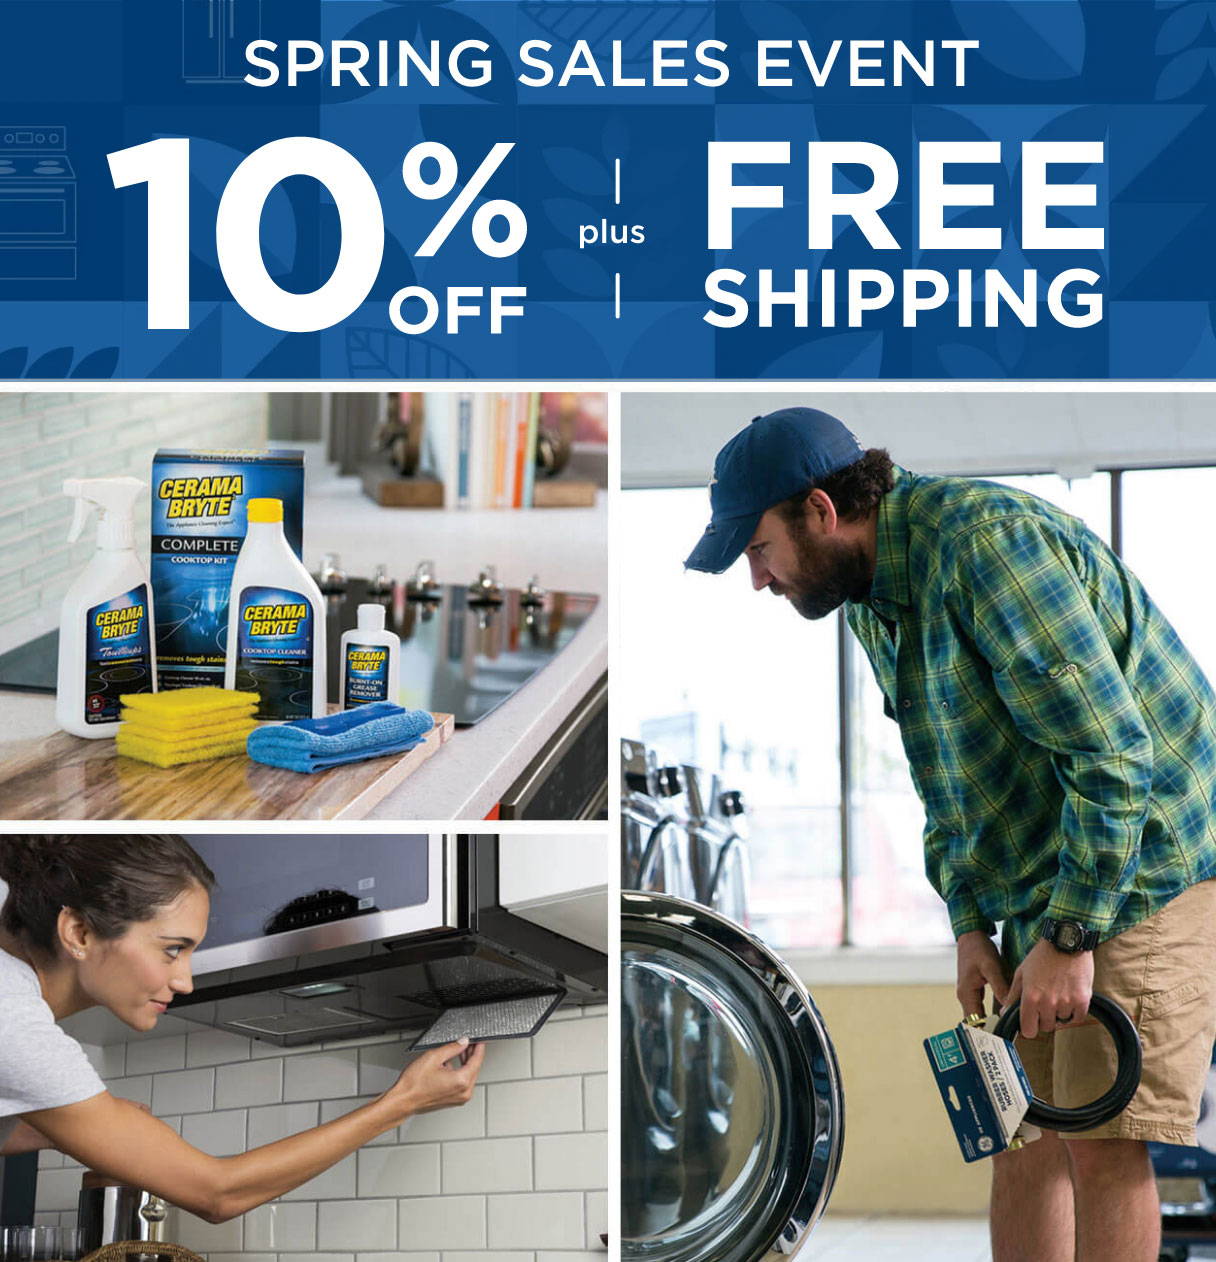 SAVE 15% OFF PLUS FREE SHIPPING on Refrigerator & Household water filters*